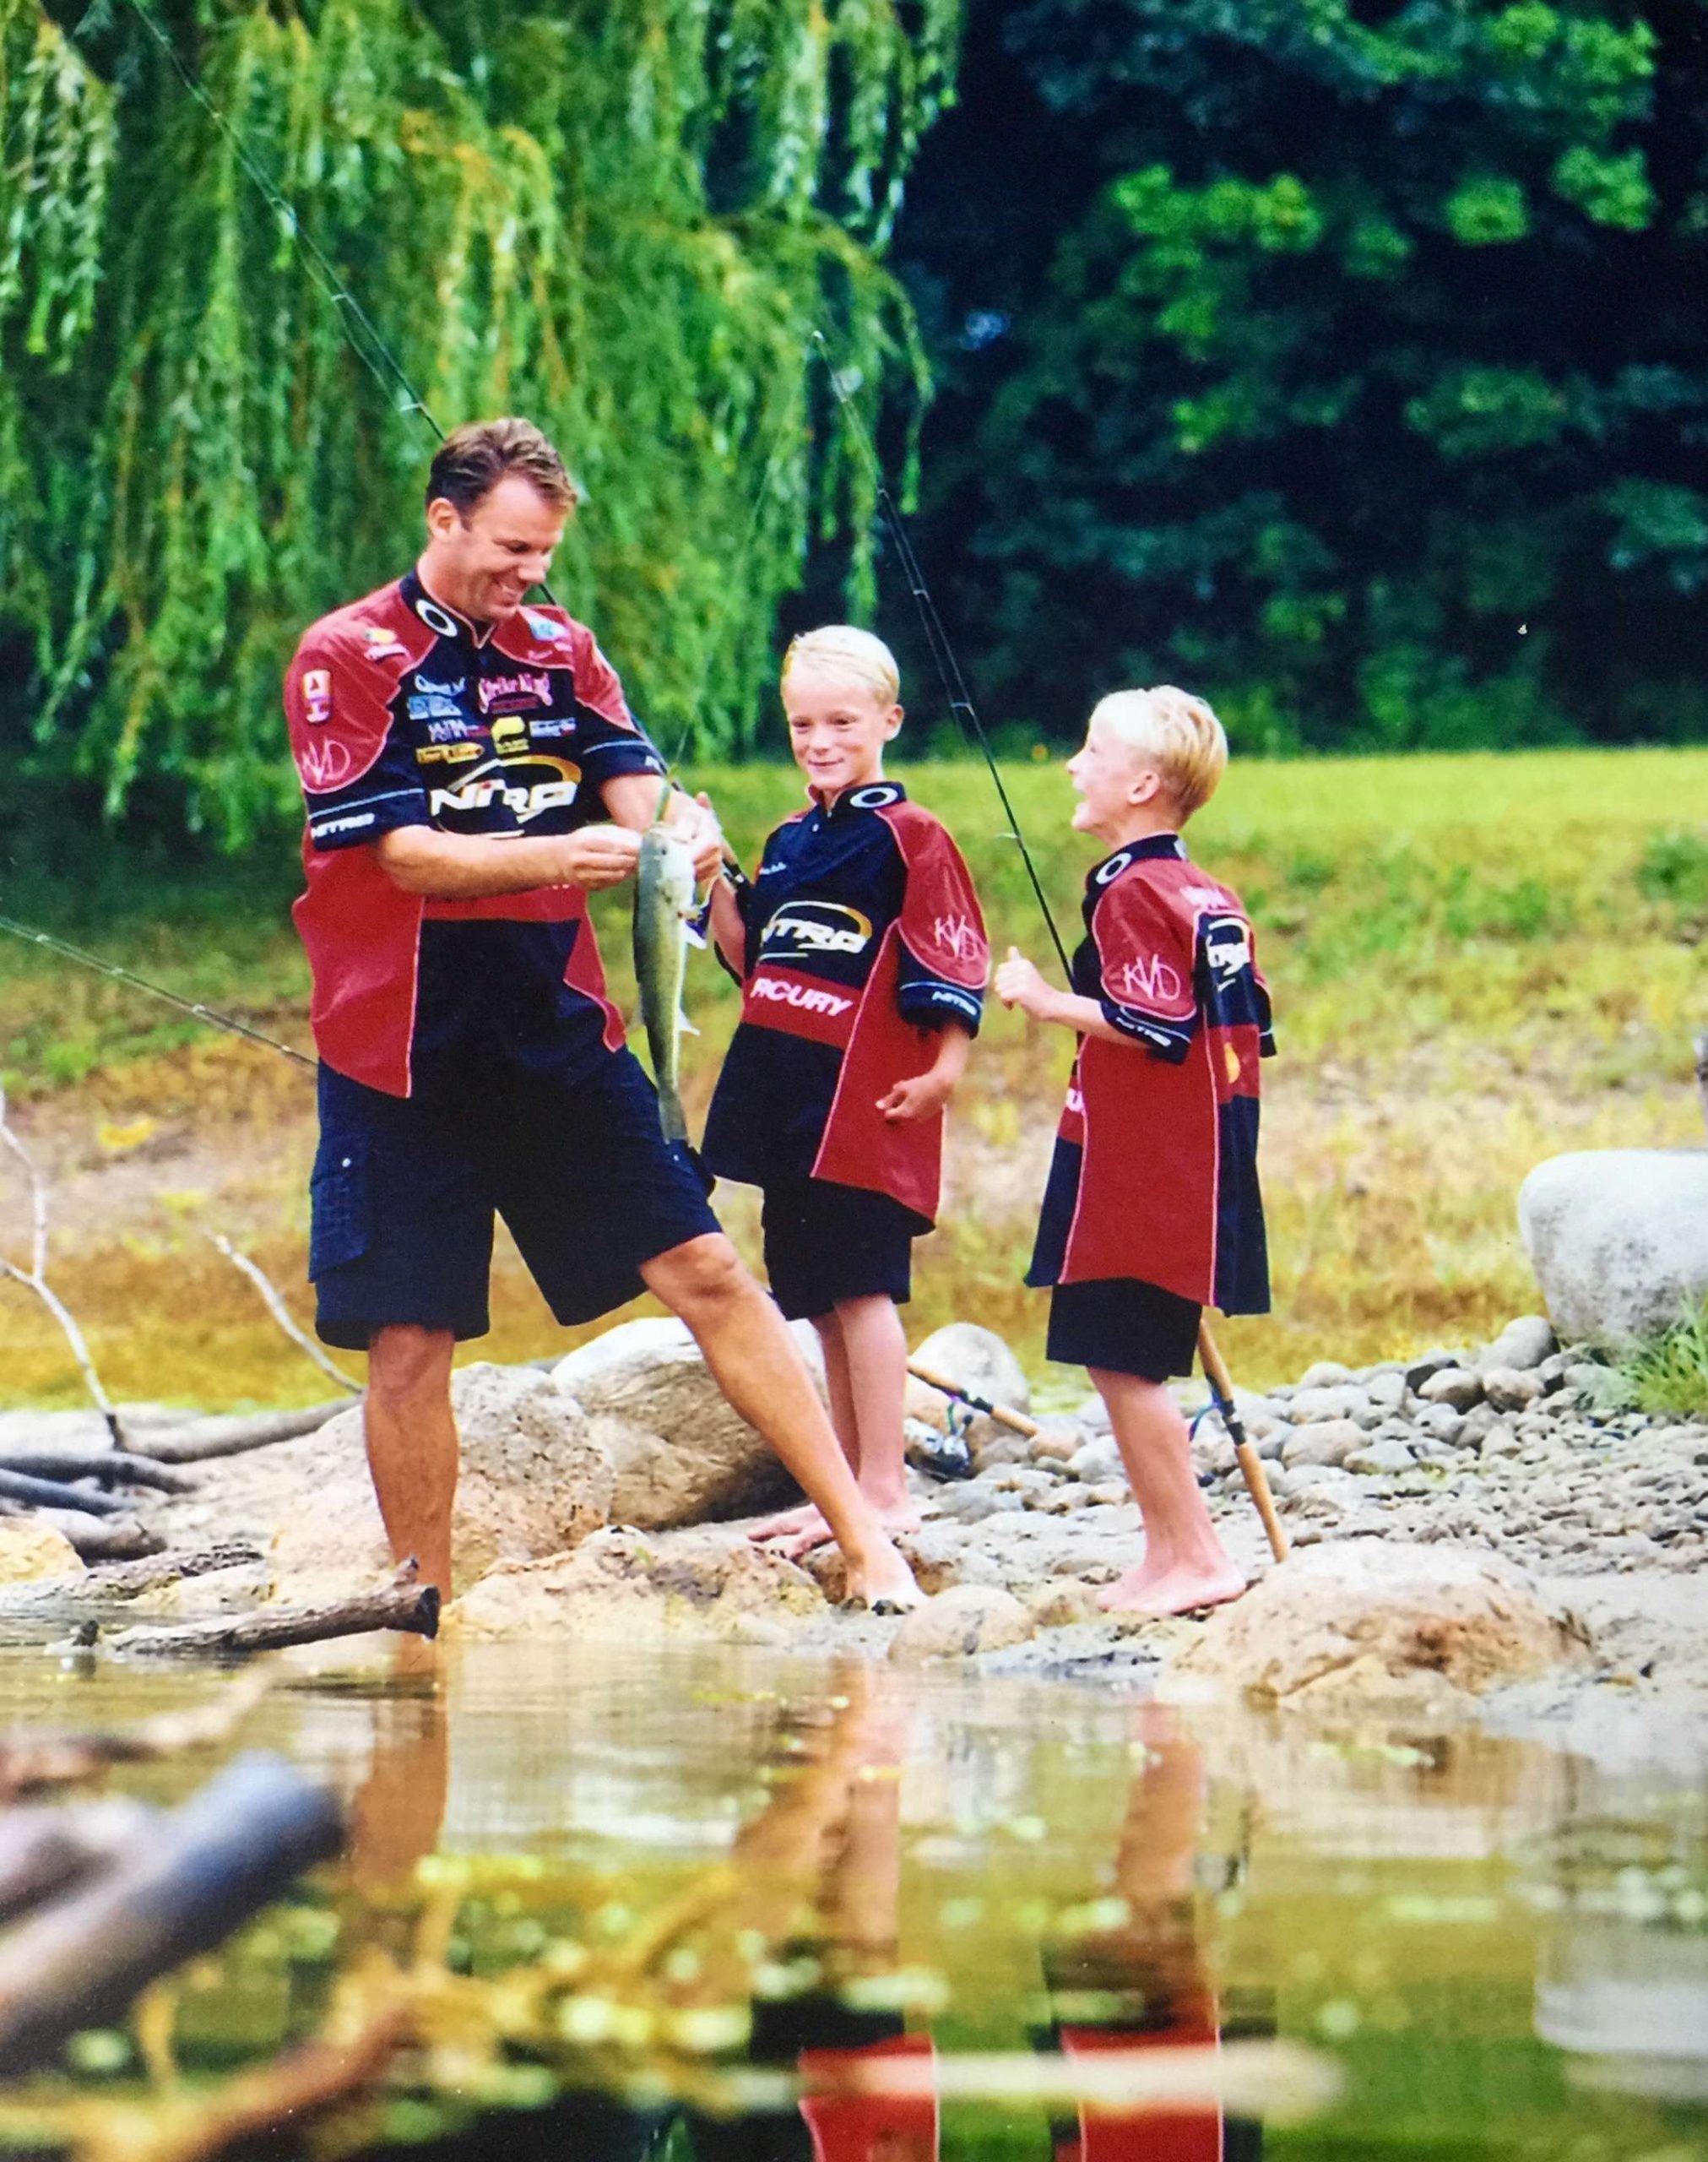 Kevin VanDam has always had an affinity for the outdoors, and heâs shared that love with his sons. âEverything in our life revolves around [fishing] in one shape or form,â he said in 2009.